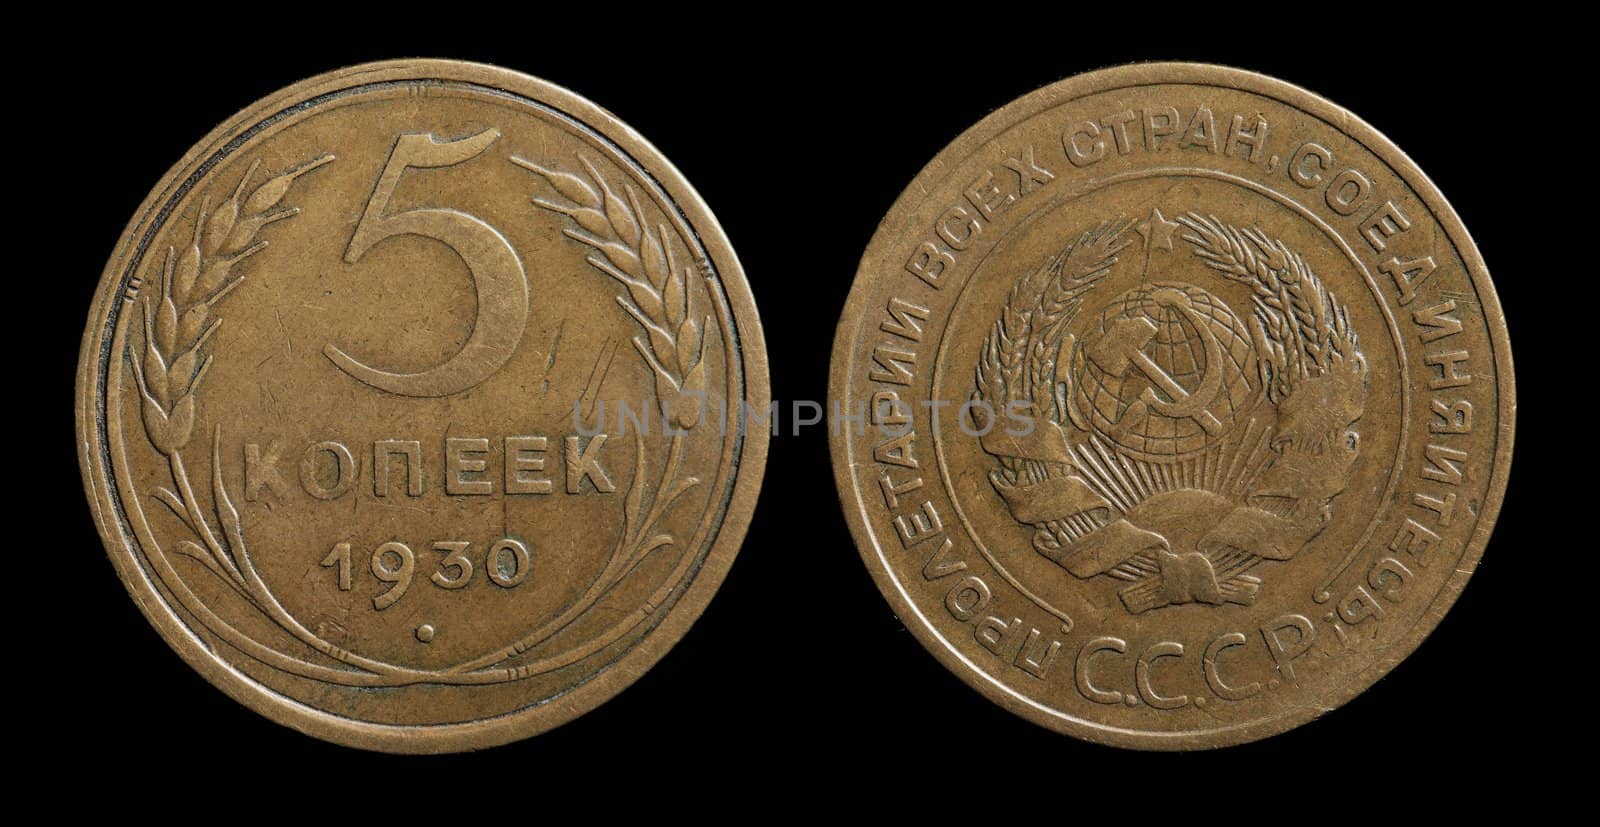 5 kopeks coin from from Soviet Union, 1930, isolated on black.